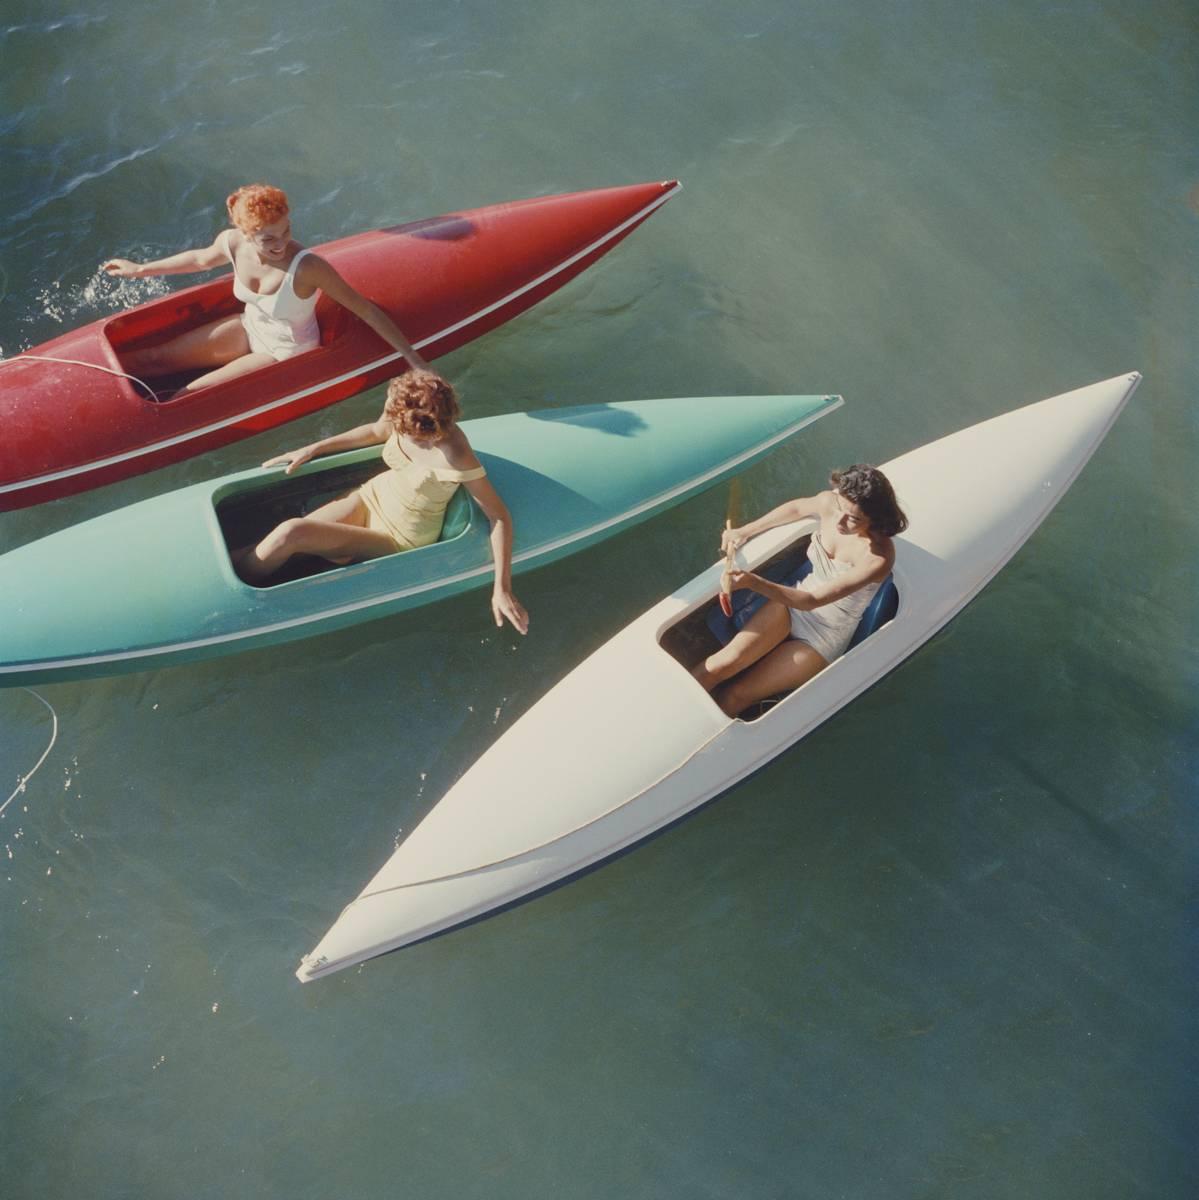 'Lake Tahoe Canoes' by Slim Aarons

Young women canoeing on the Nevada side of Lake Tahoe, 1959.

Three young woman are pictured in their red, turquoise and white coloured canoes on Lake Tahoe in the sunshine. 

This photograph epitomises the travel